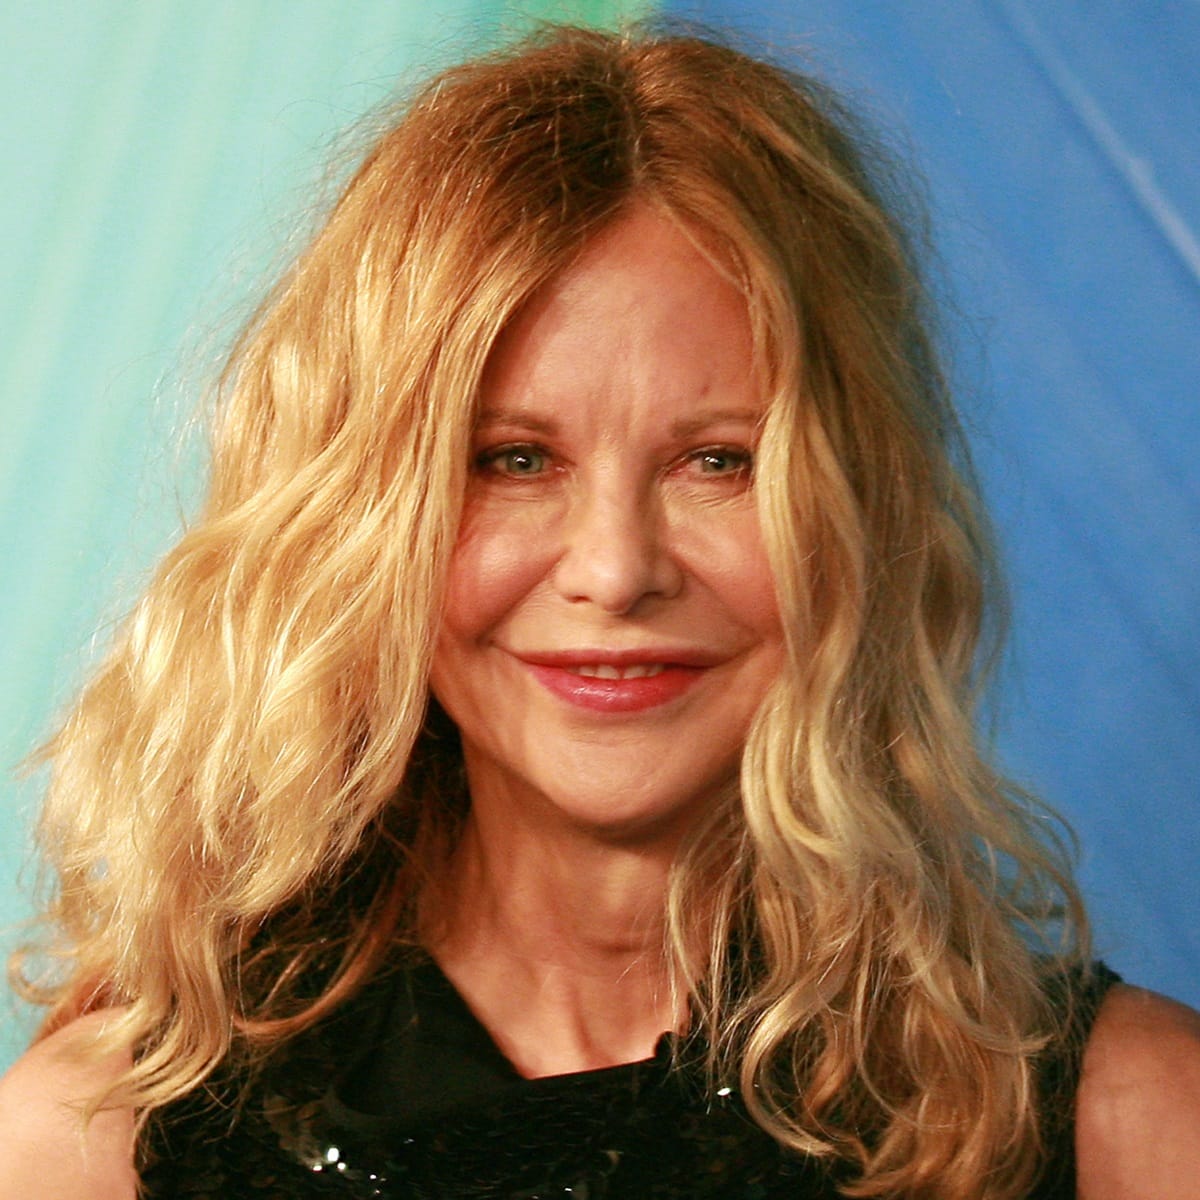 Some people believe Meg Ryan has had a nose job, cheek implants, and Botox injections, while others believe that her changing appearance is due to natural aging and weight loss